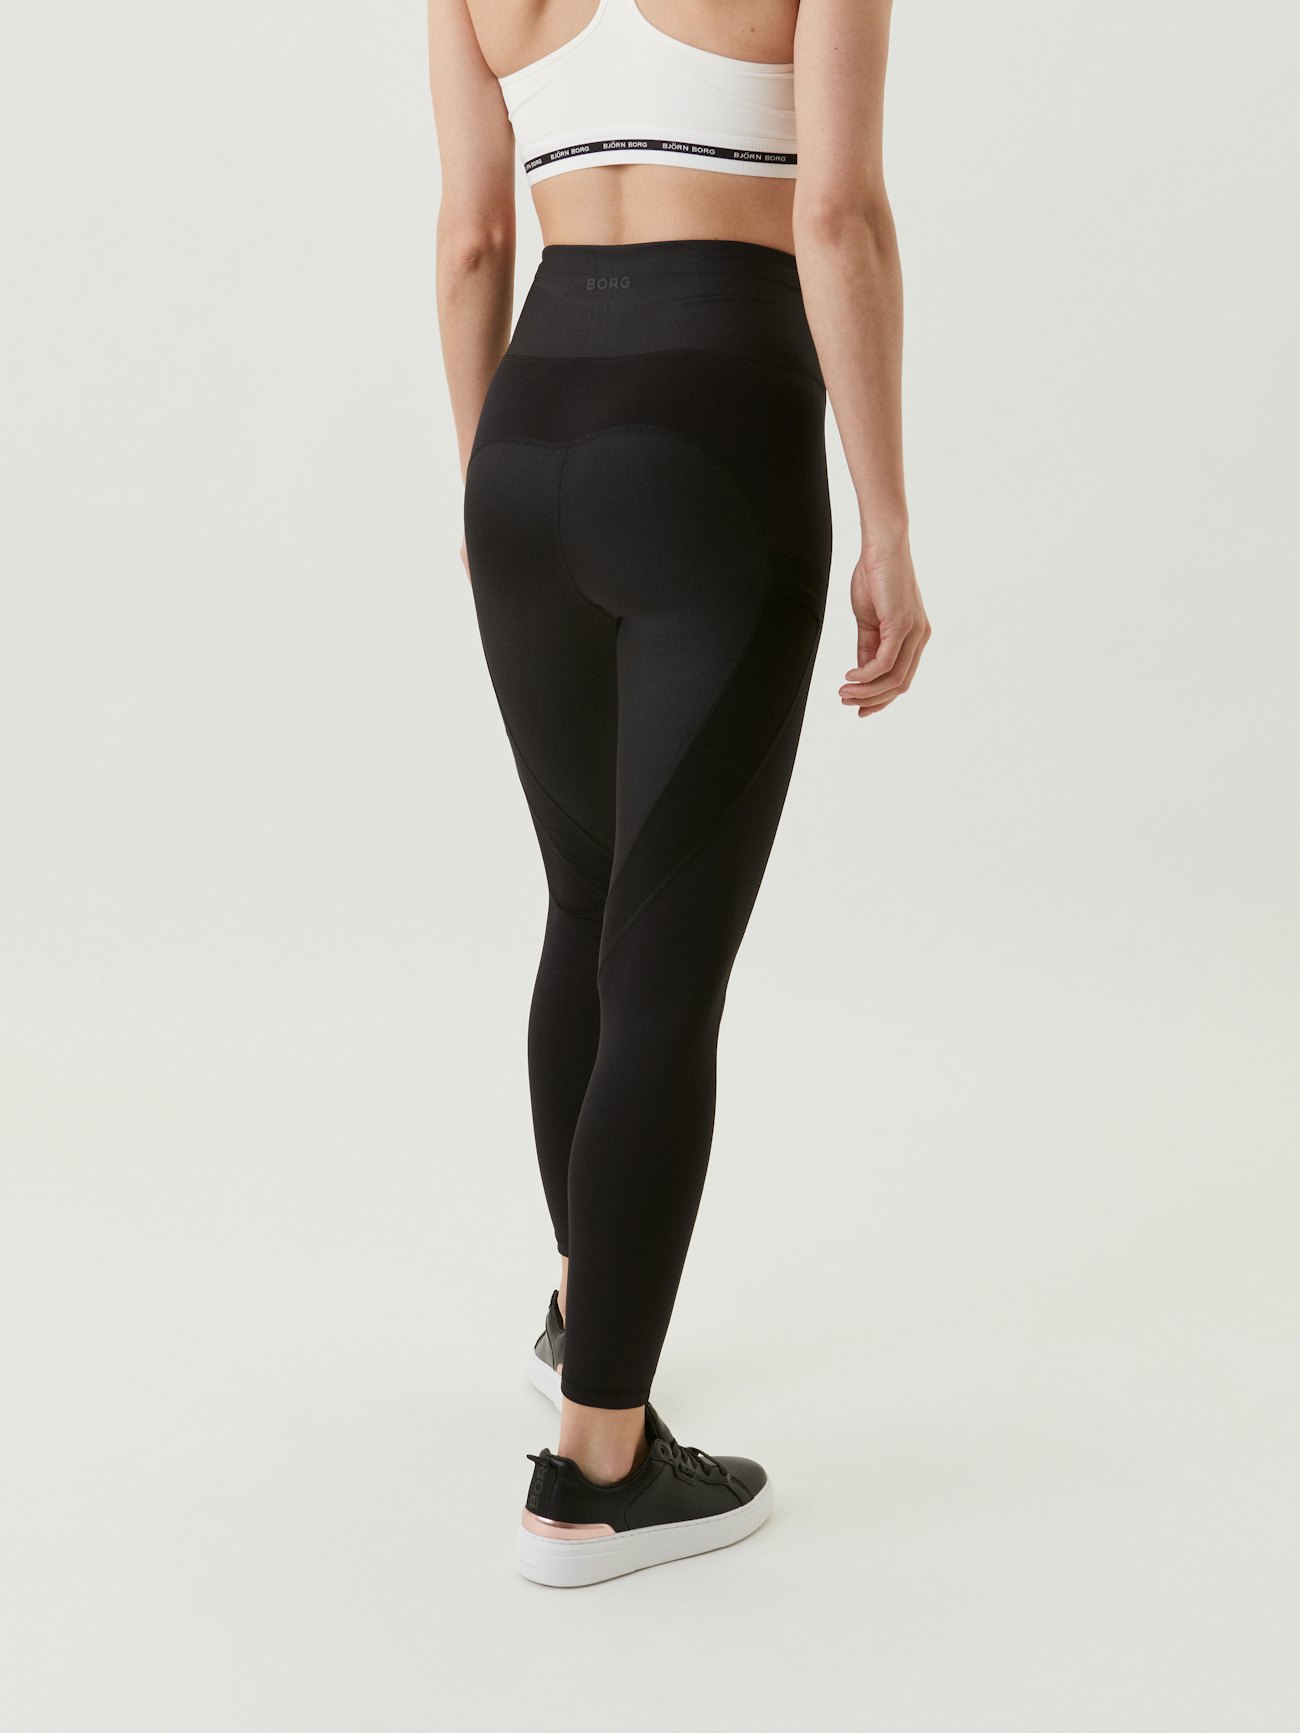 Black Bamboo Terry Leggings by So-Fine